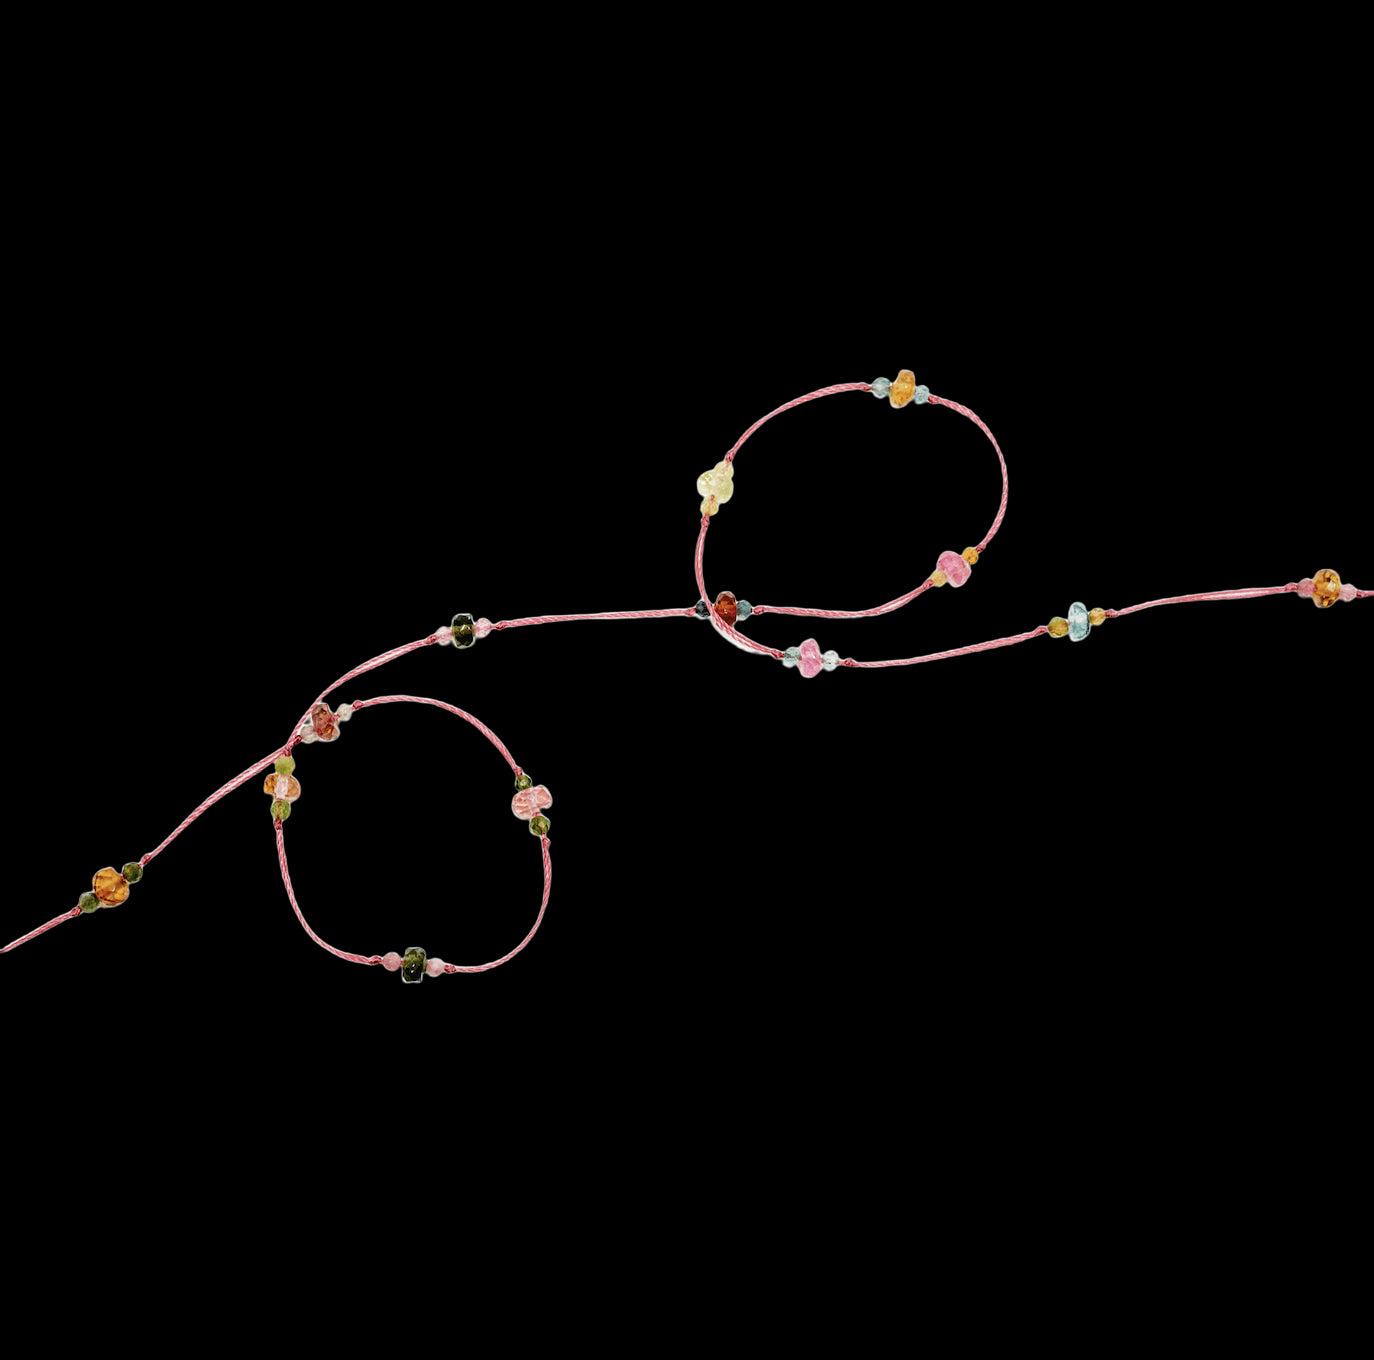 Loopy Tourmalines 3 - Indian Pink Thread